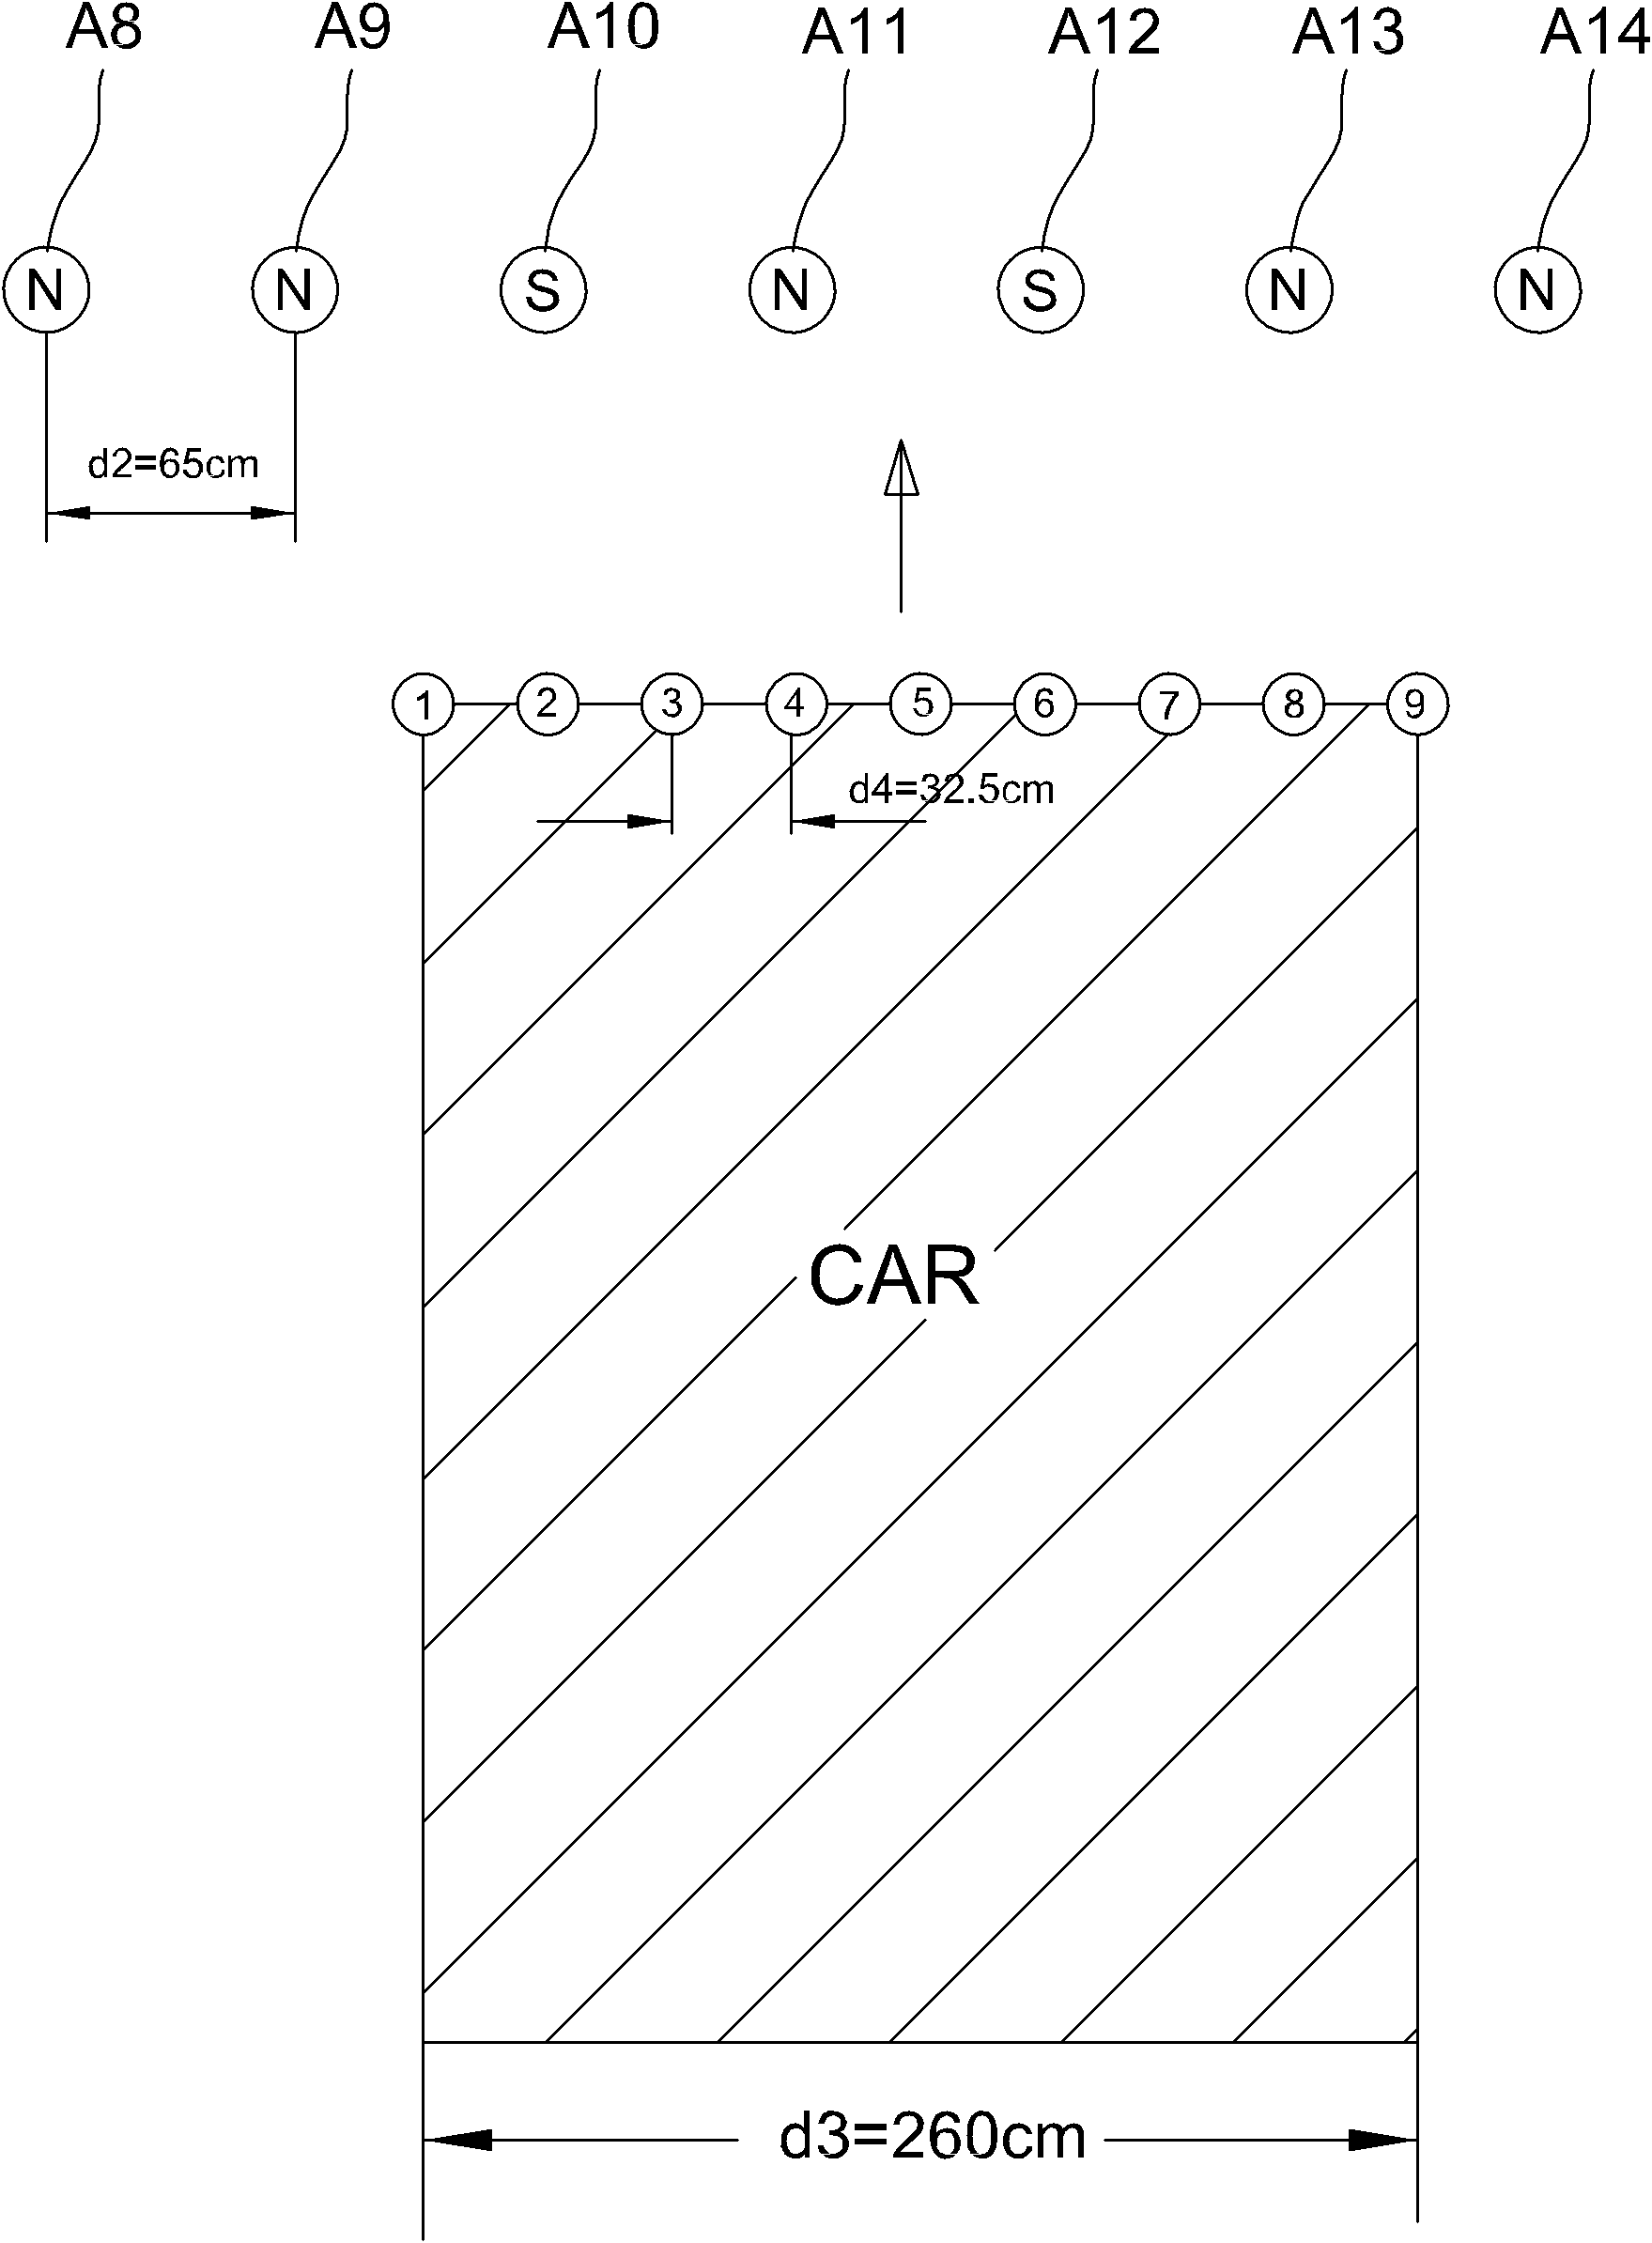 Magnetic positioning method of traffic vehicle based on displacement cyclic unique code